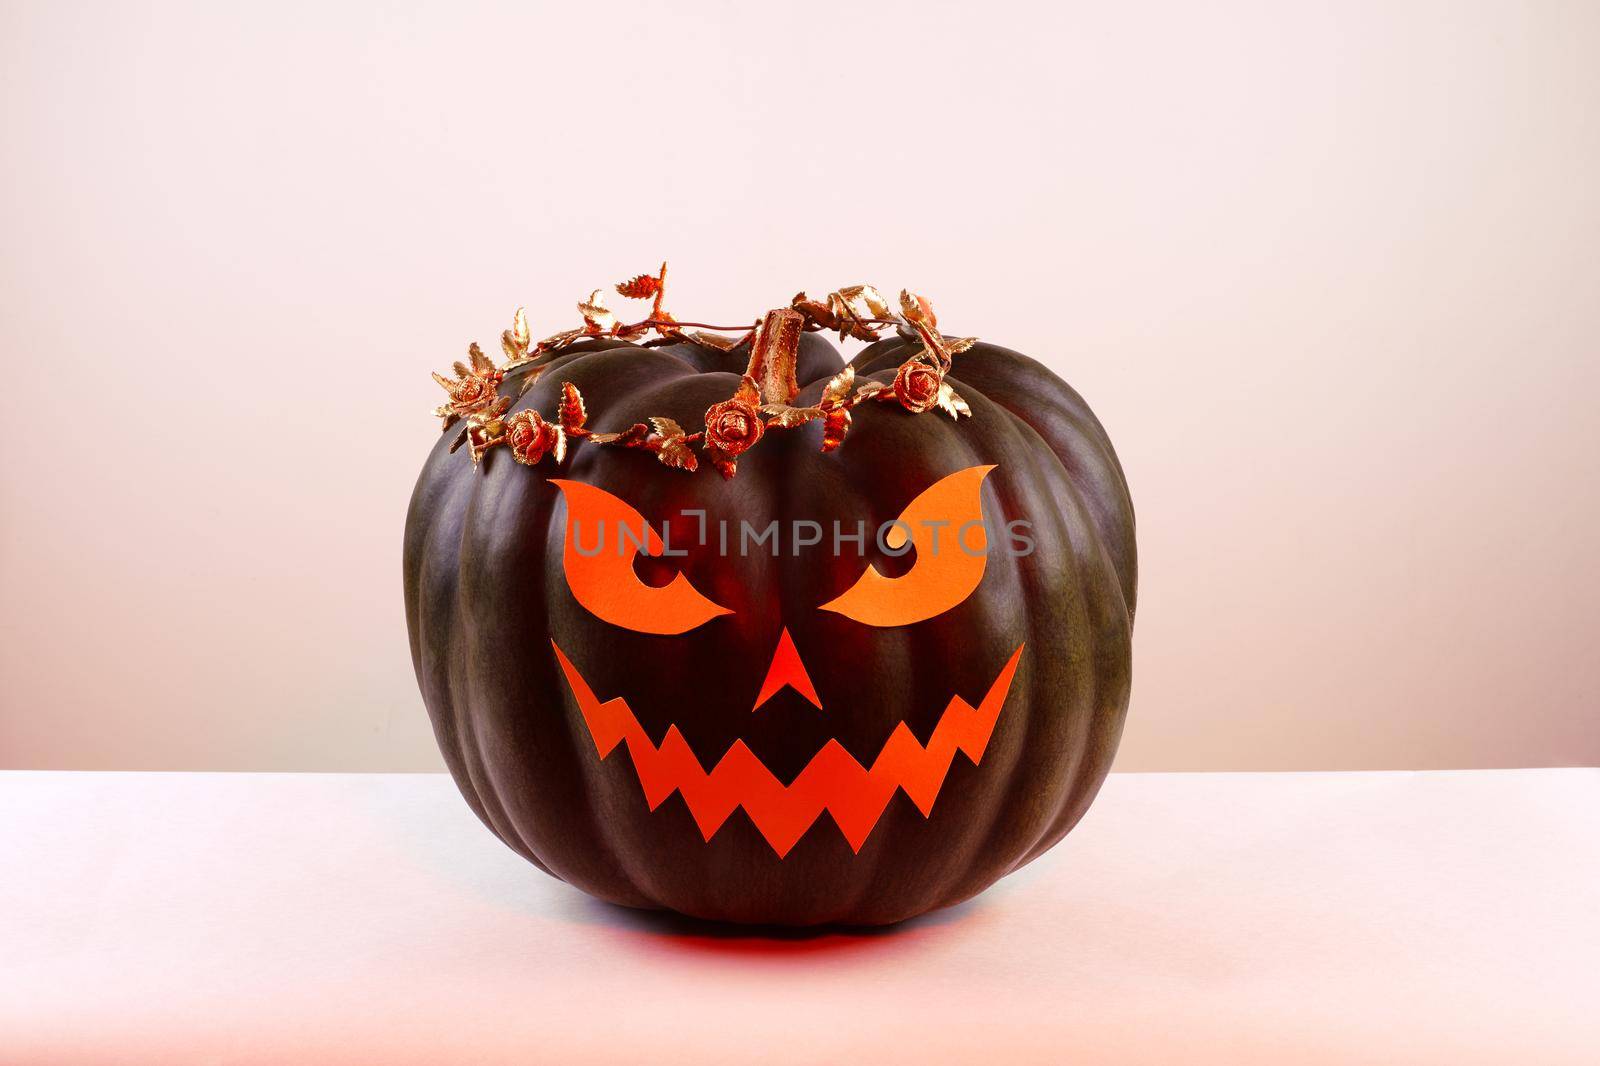 Halloween Pumpkin with Paper Cut Scary Face on a White Background. Jack Halloween. Smile Jack Pumpkin by MarinaFrost